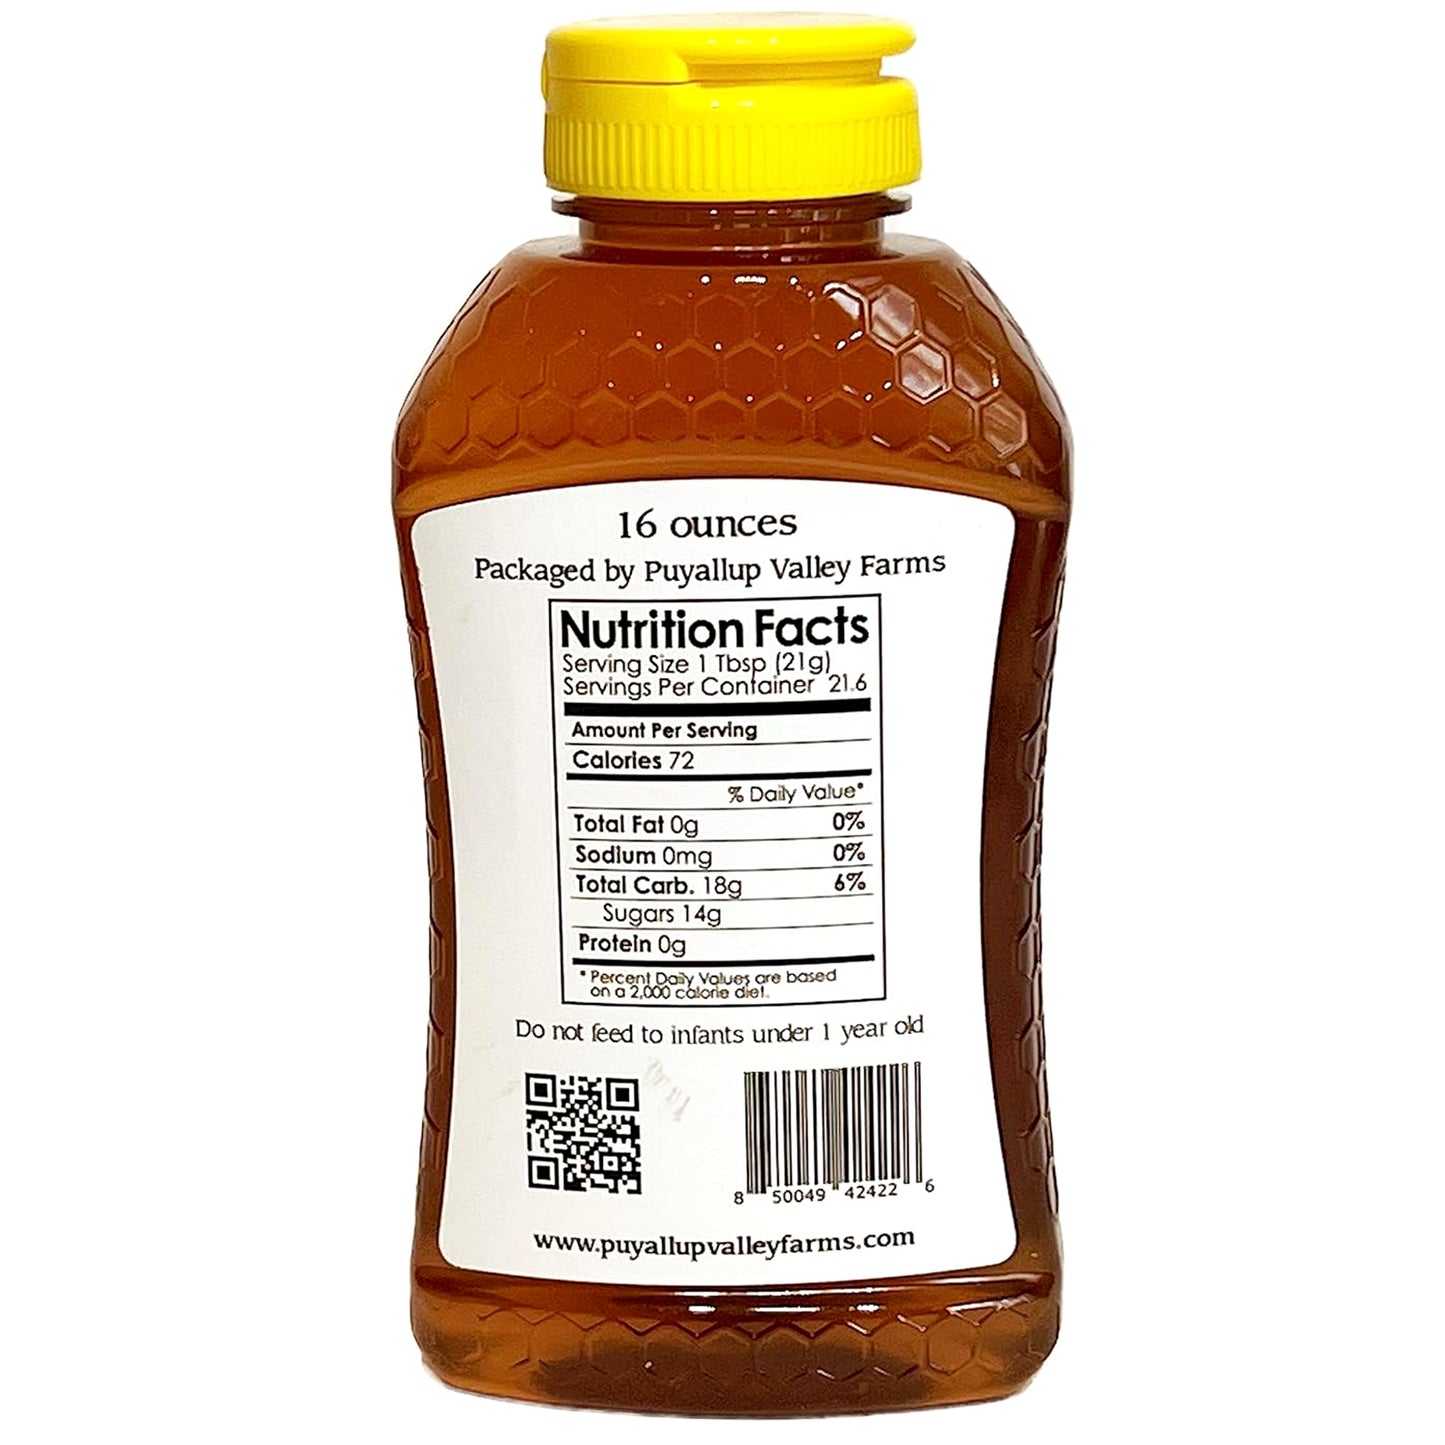 Orange Blossom Raw Honey by Puyallup Valley Farms | Organic Unfiltered Raw Honey | All-Natural Sweetener | No Additives | Non-Pasteurized Organic Raw Honey | BPA Free Raw Organic Honey Squeeze Bottle | No Drip Cap | FREE SHIPPING Orange Blossom 16 Oz